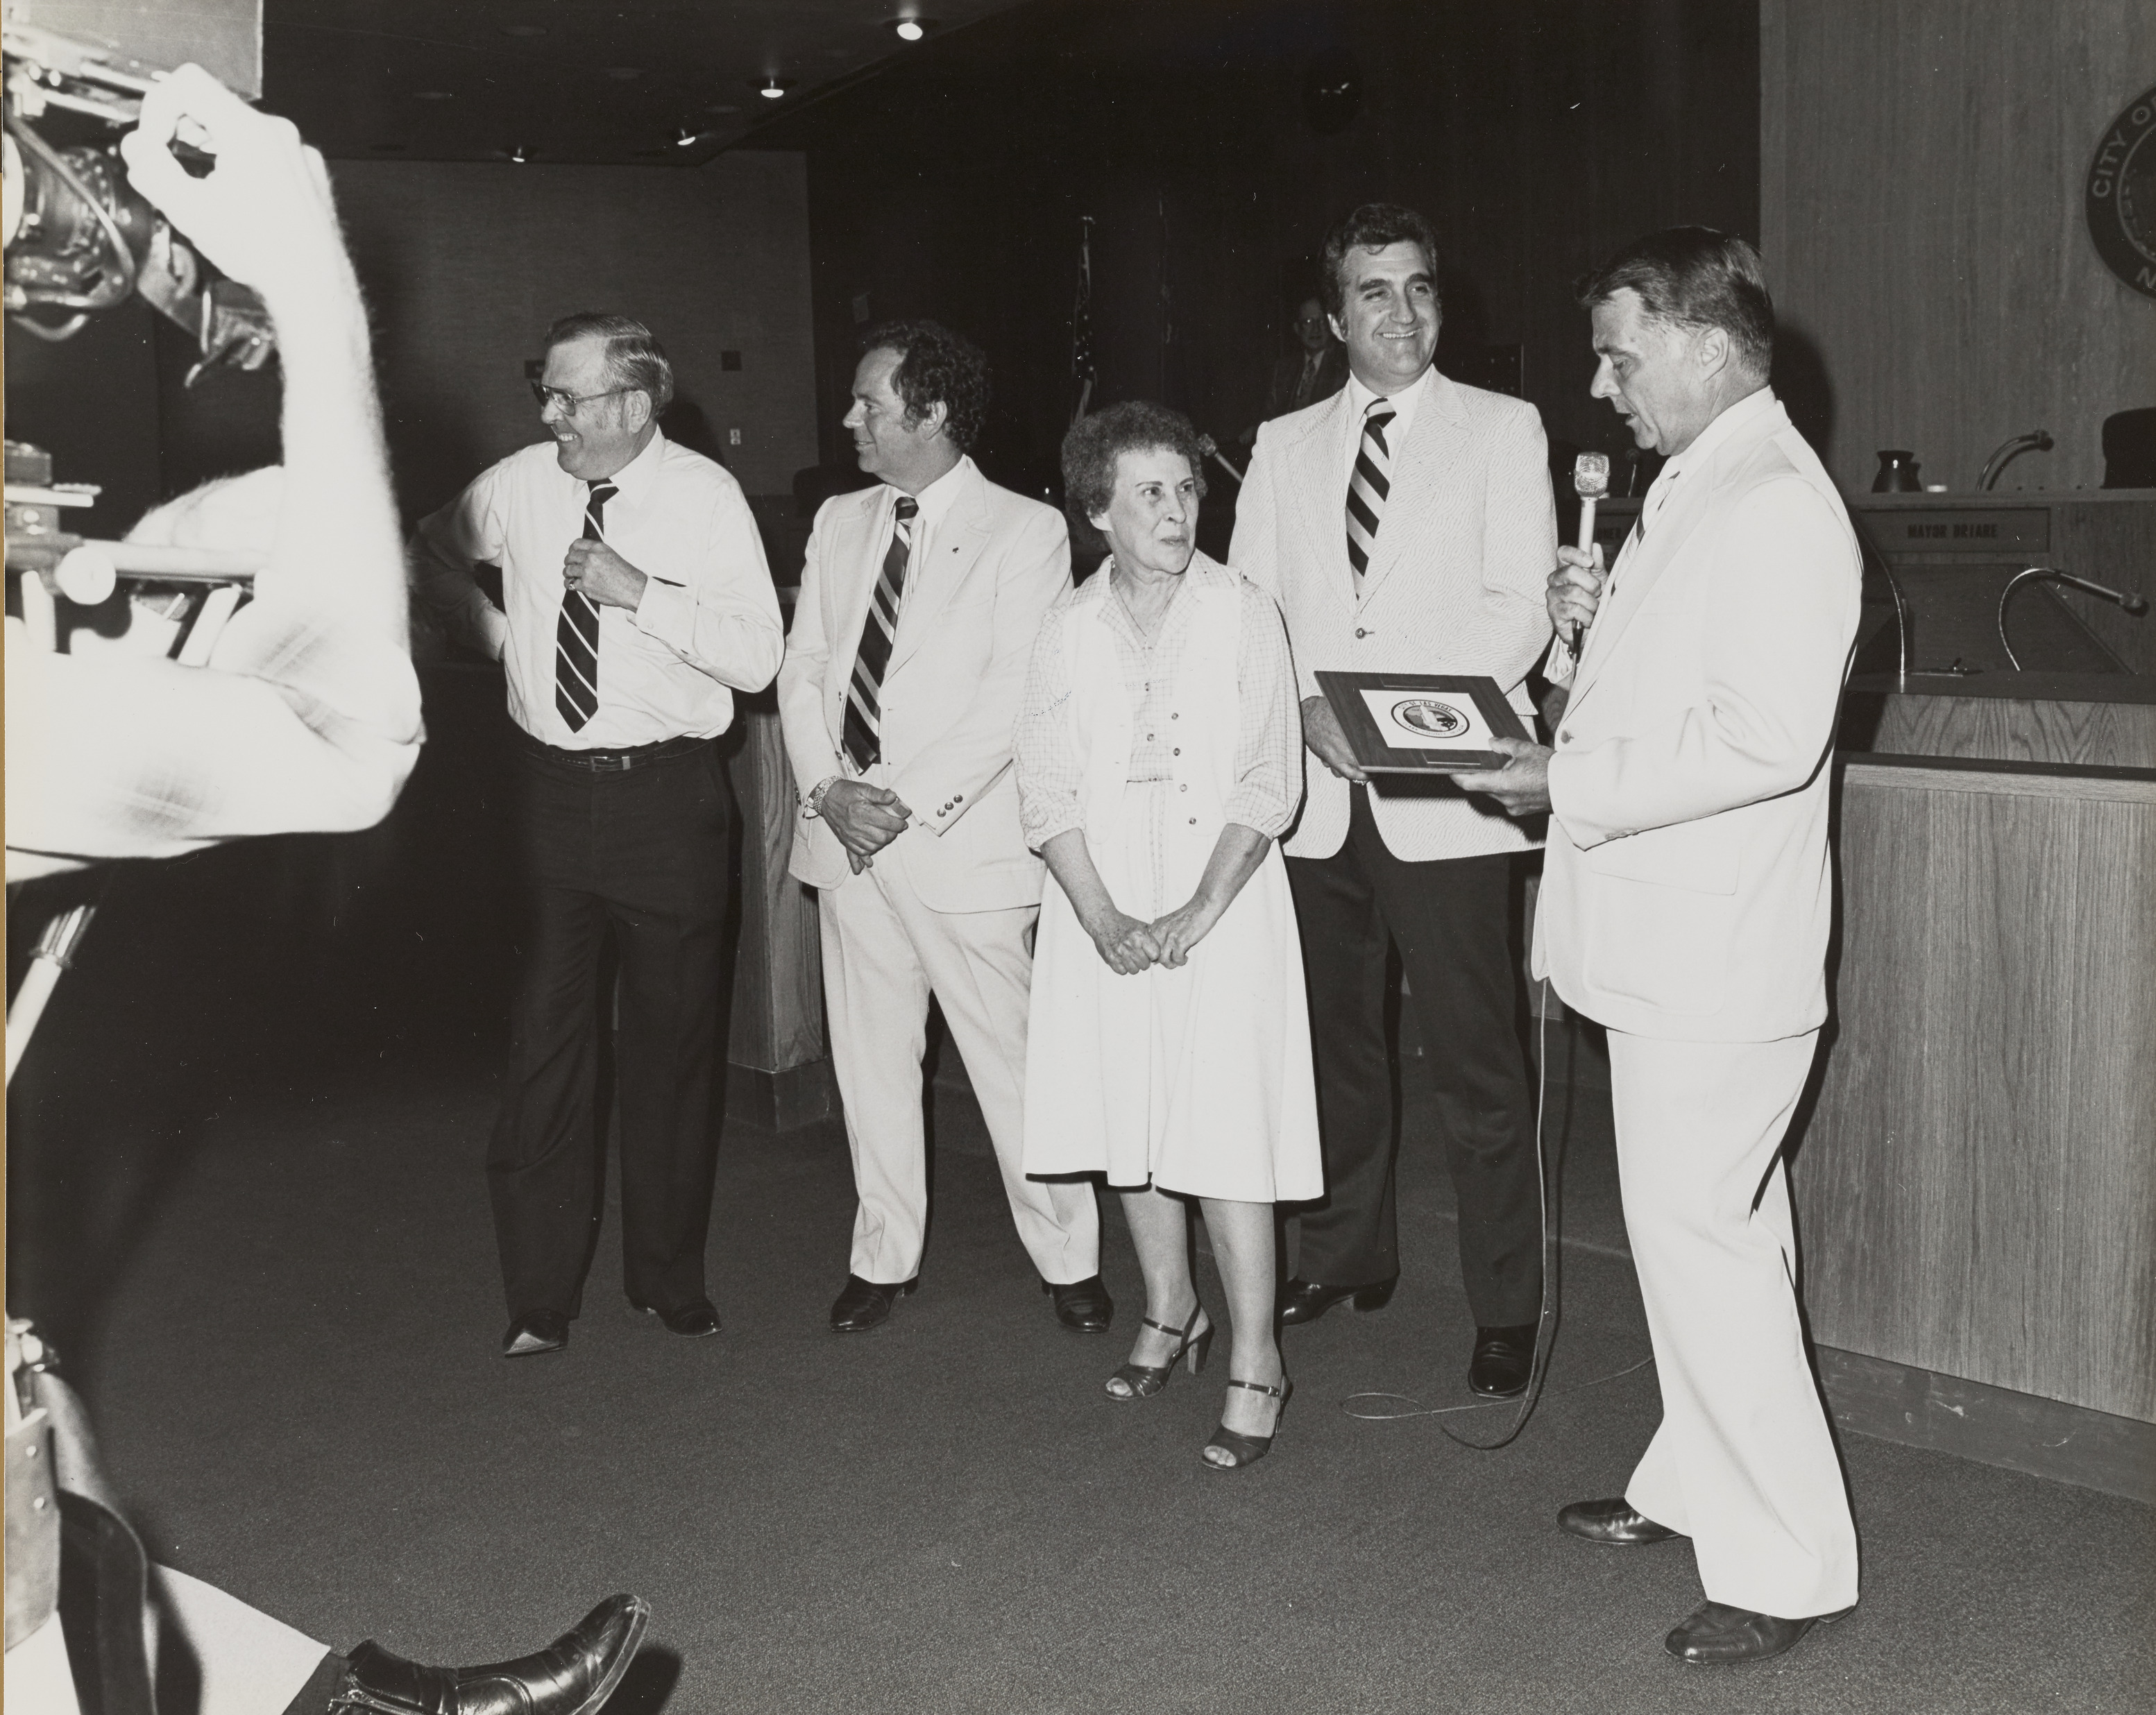 Photograph of Mayor Briare, Ron Lurie and others giving retirement award to Ila Britt, Director for the Department of Business Activity, September 2, 1981